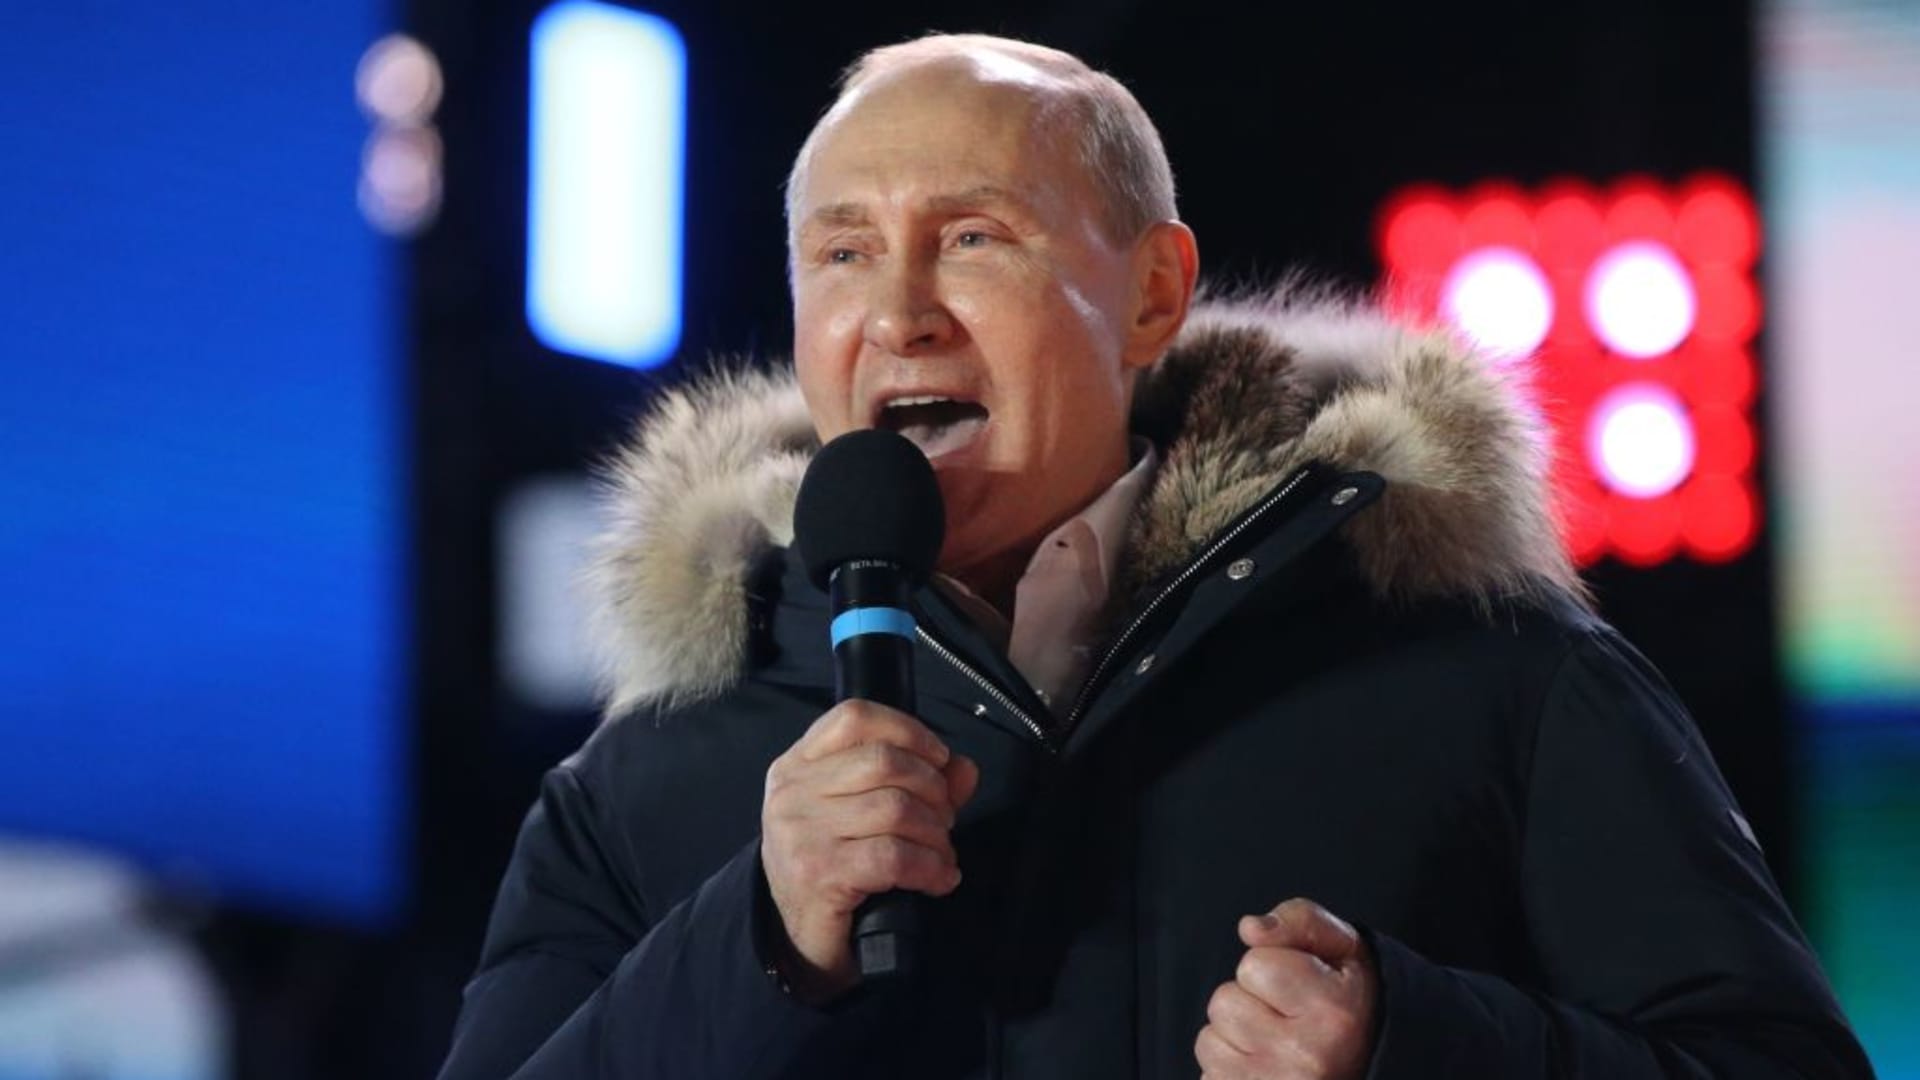 Russians vote in an election that Putin will win, but the Kremlin is looking for a landslide victory